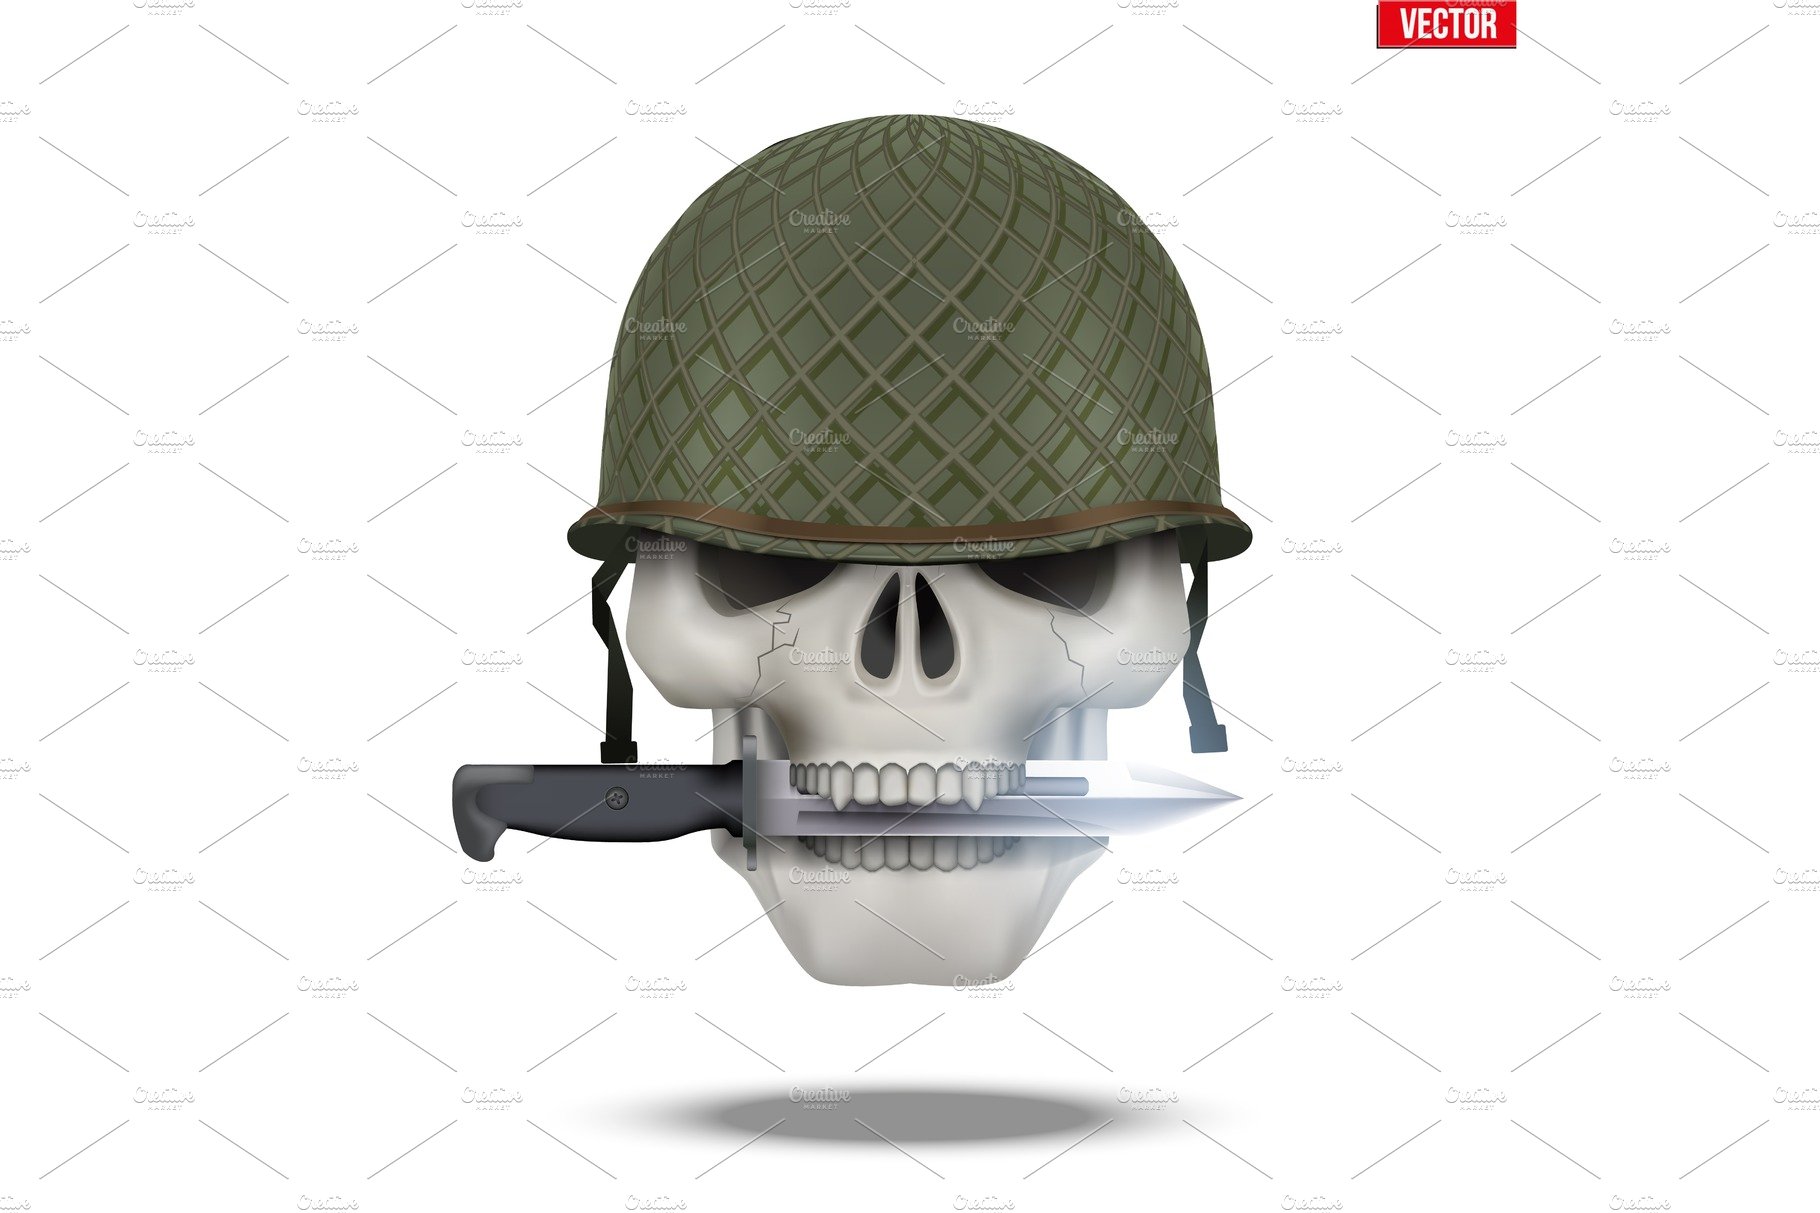 Skull with Military helmet and knife cover image.